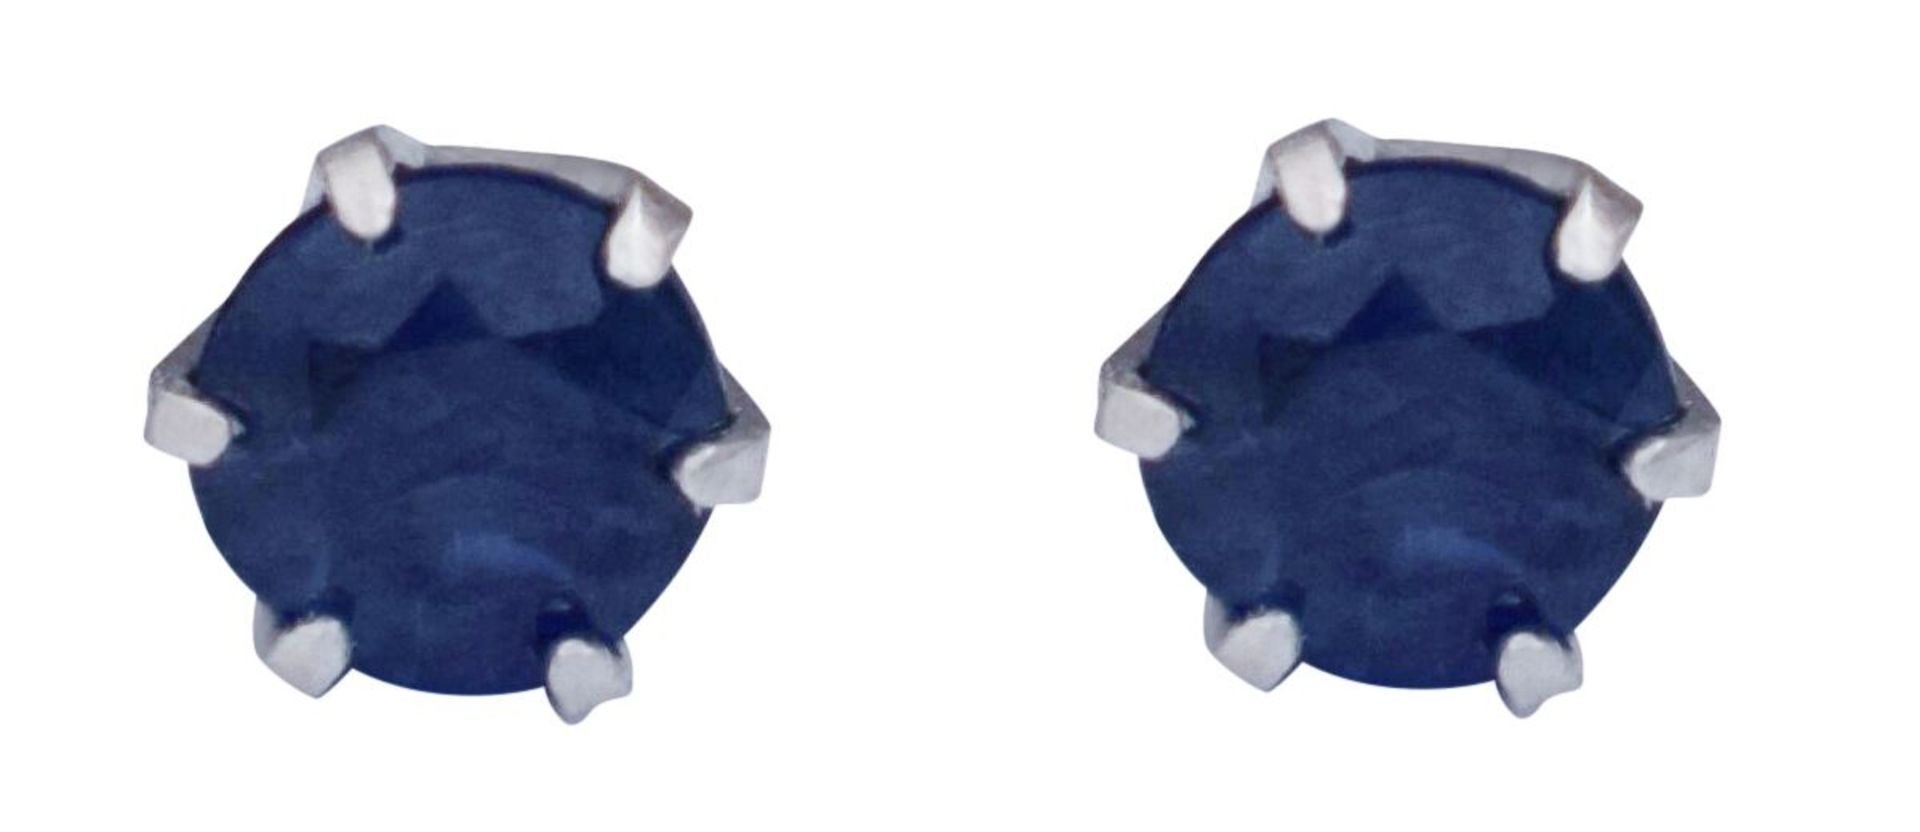 Sapphire Earrings In Platinum, Platinum 900 RRP £229 Weight 0.59g, Diamond Weight 0.2ct, Colour 0. - Image 2 of 2